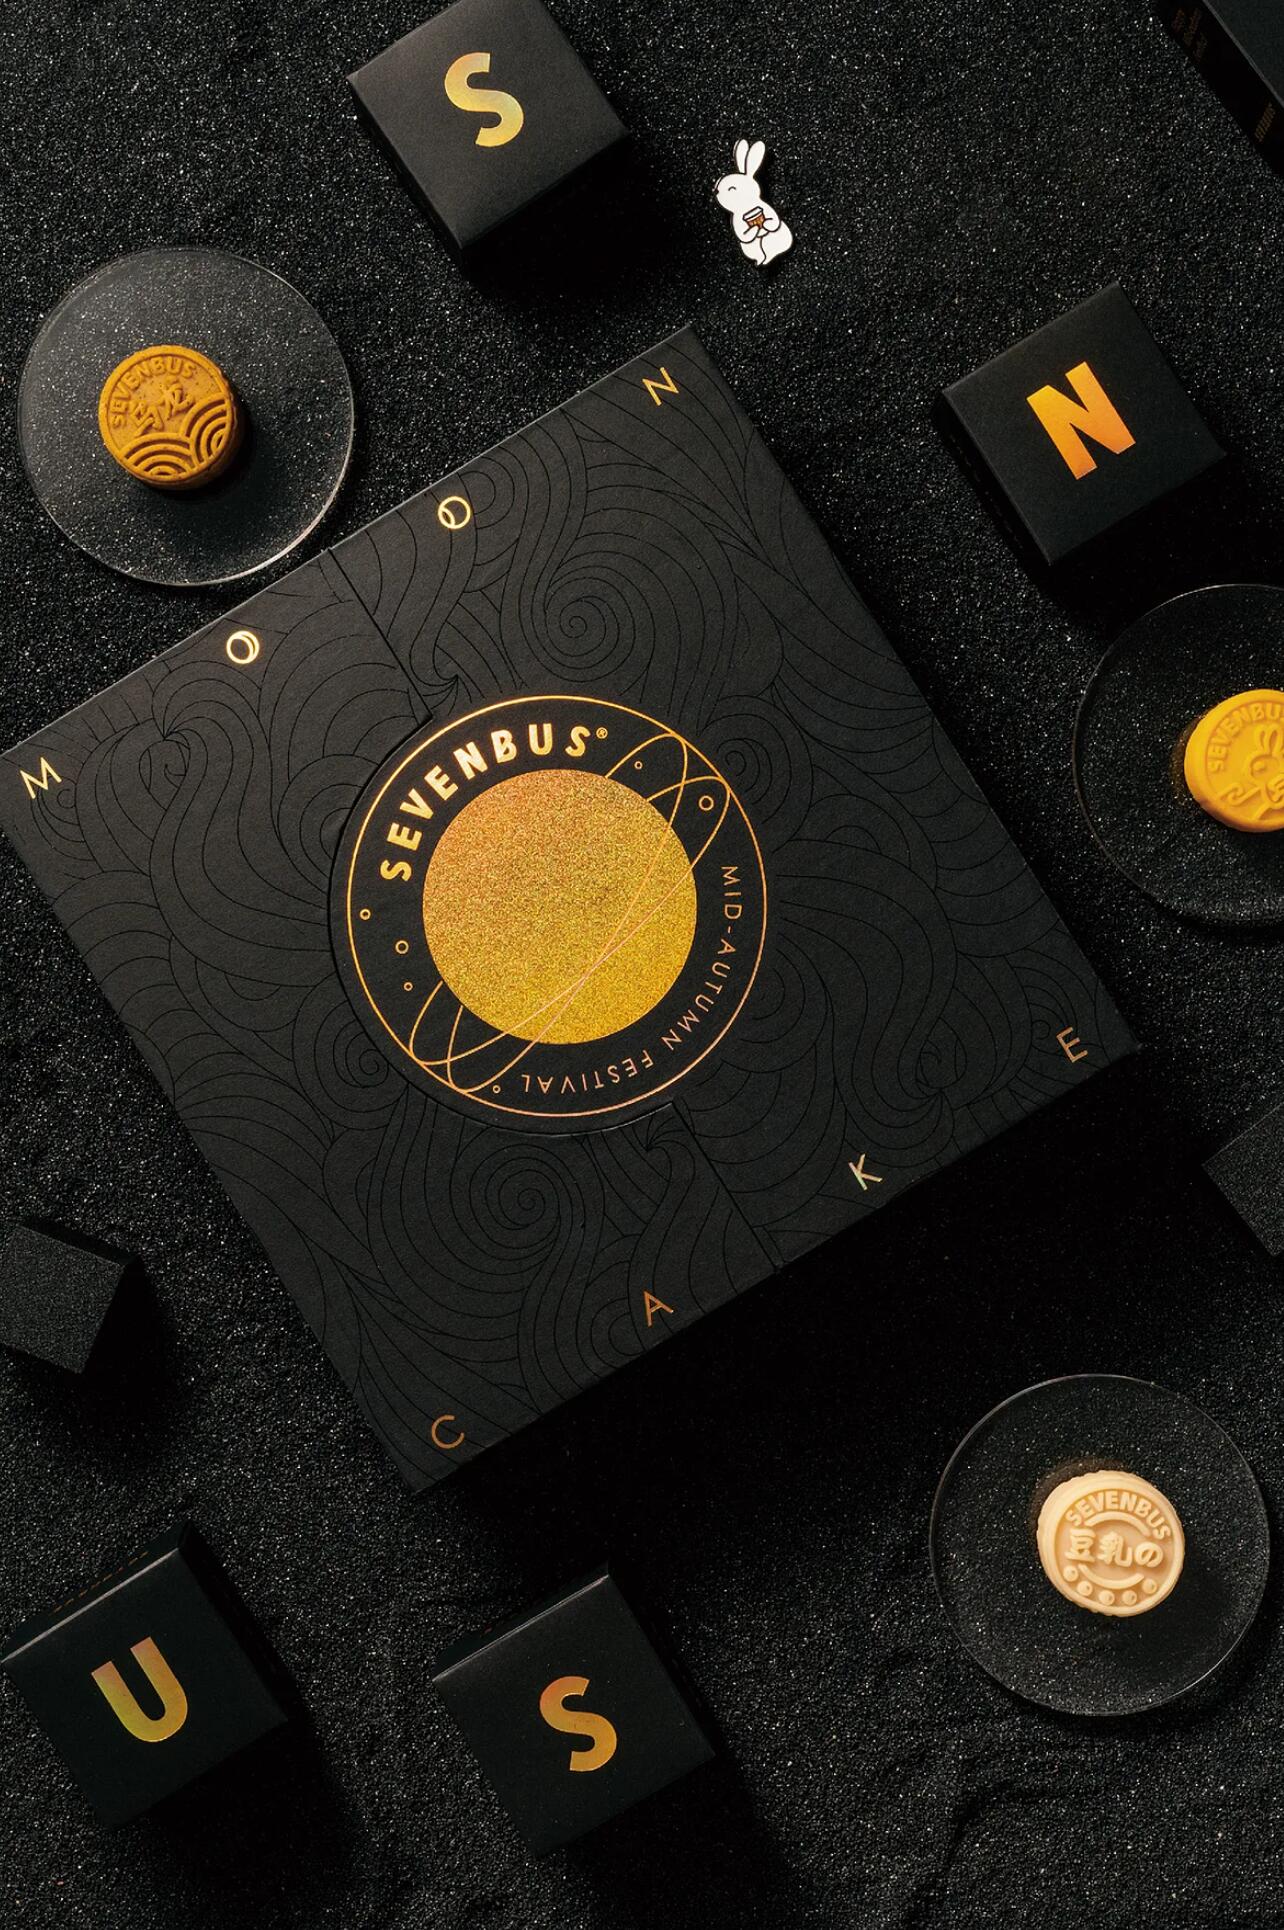 Texture and Tactility in Packaging Design